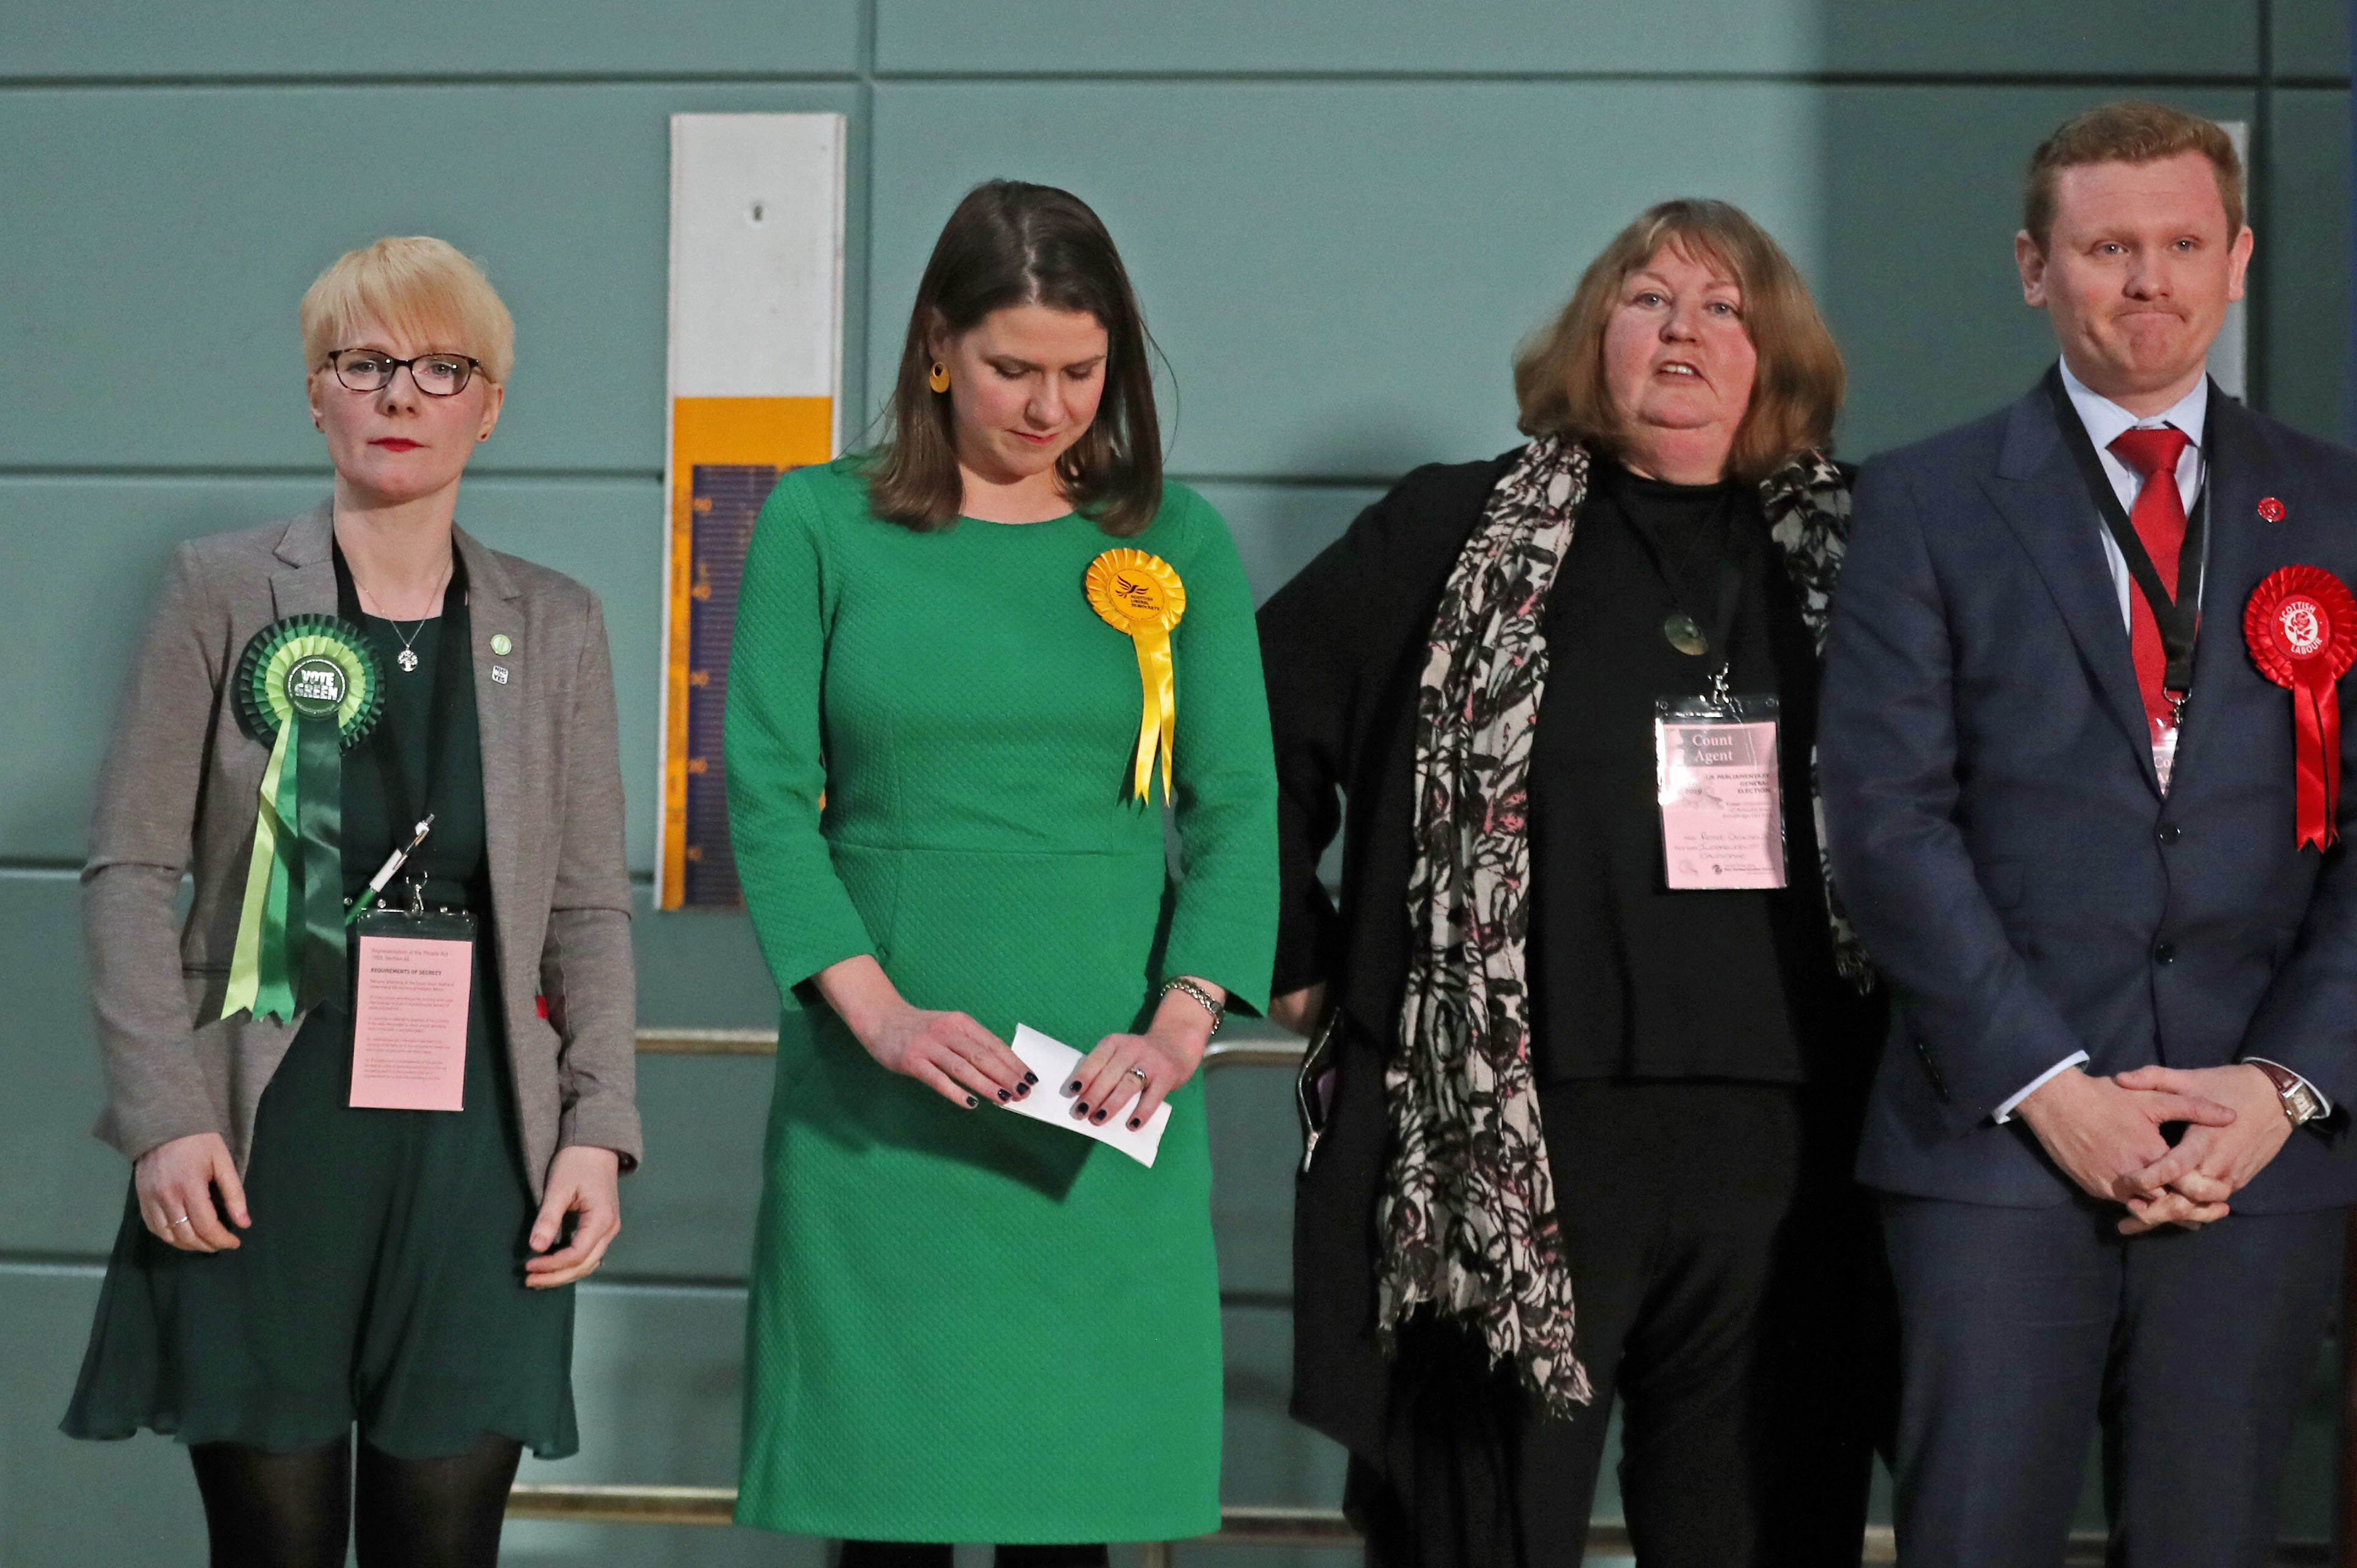 Lib Dem leader Jo Swinson (second left) listens as she loses her East Dumbartonshire constituency in the 2019 General Election, during the count at the Leisuredome, Bishopbriggs.